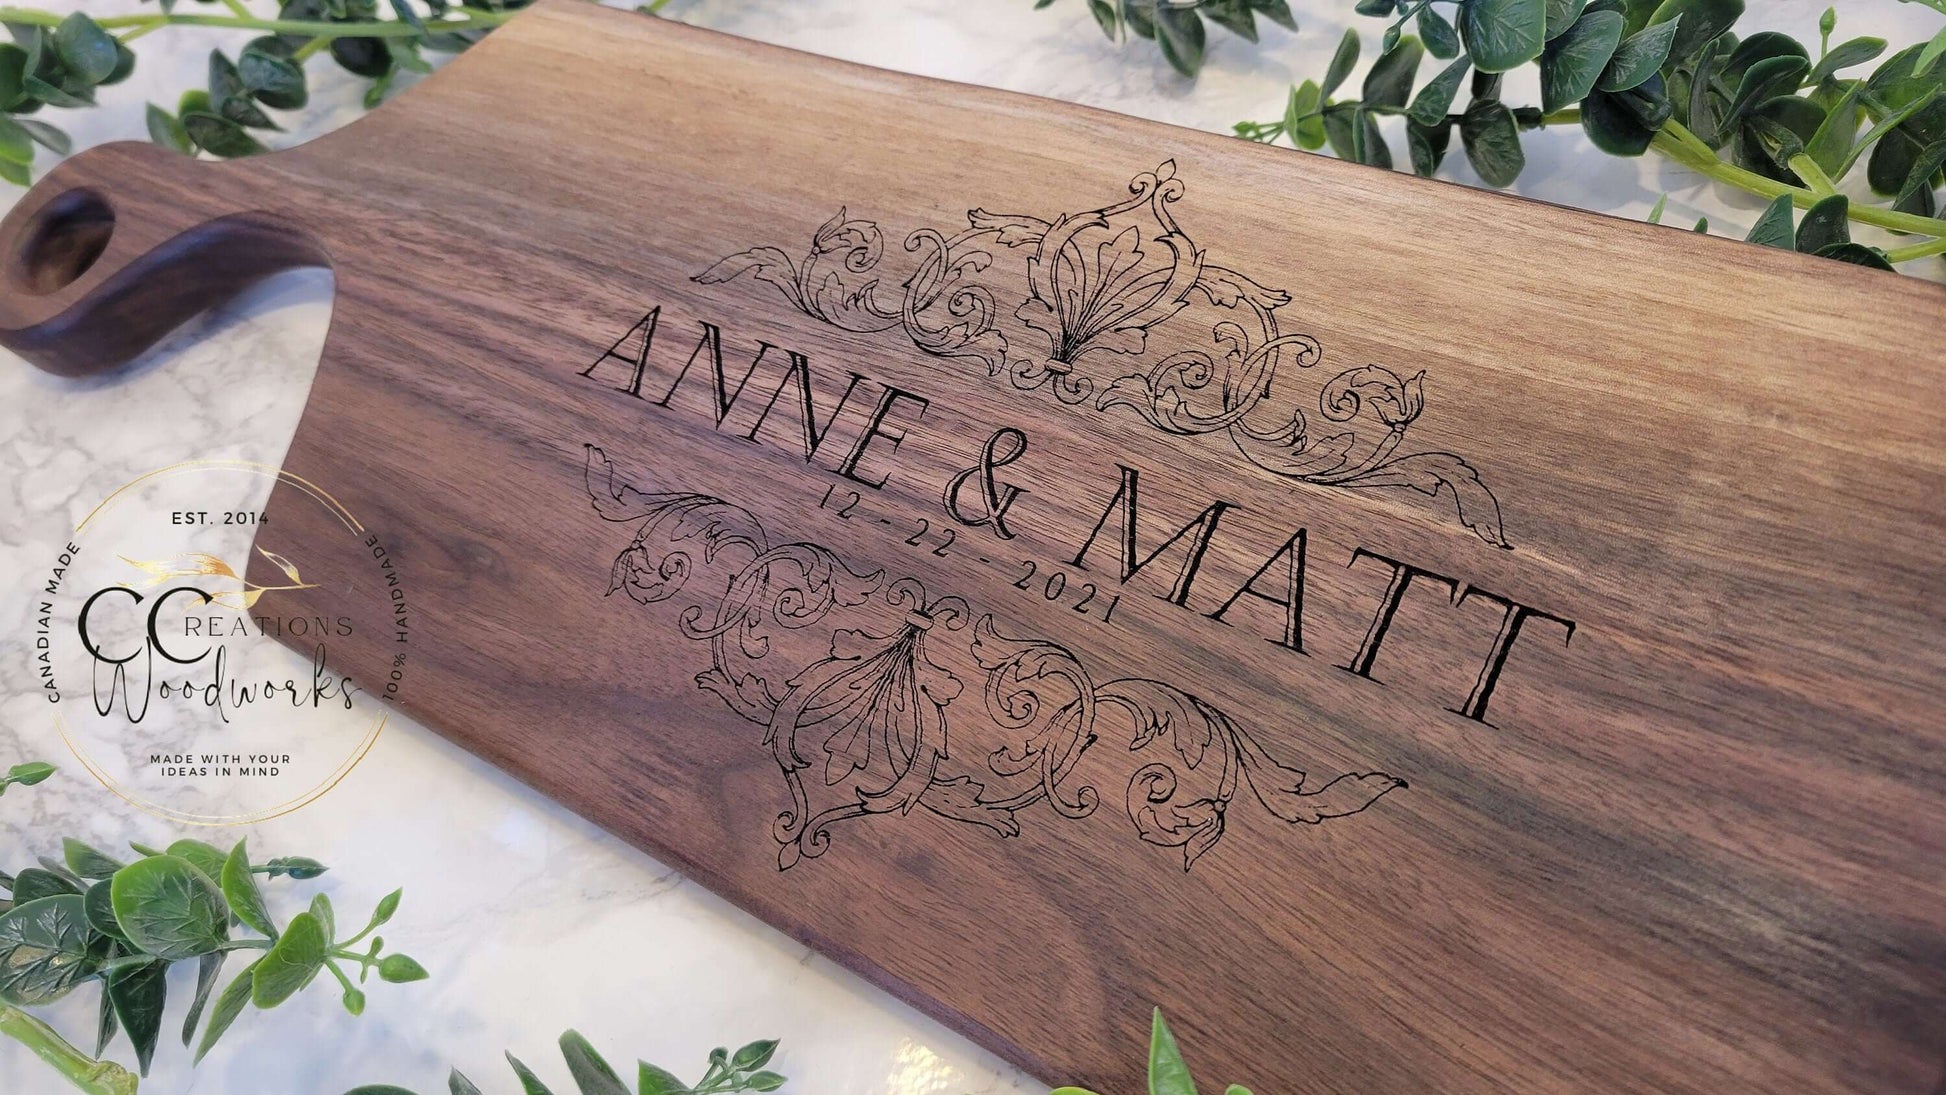 Personalized engraved gift - Engraved stone with name or word – SJEngraving